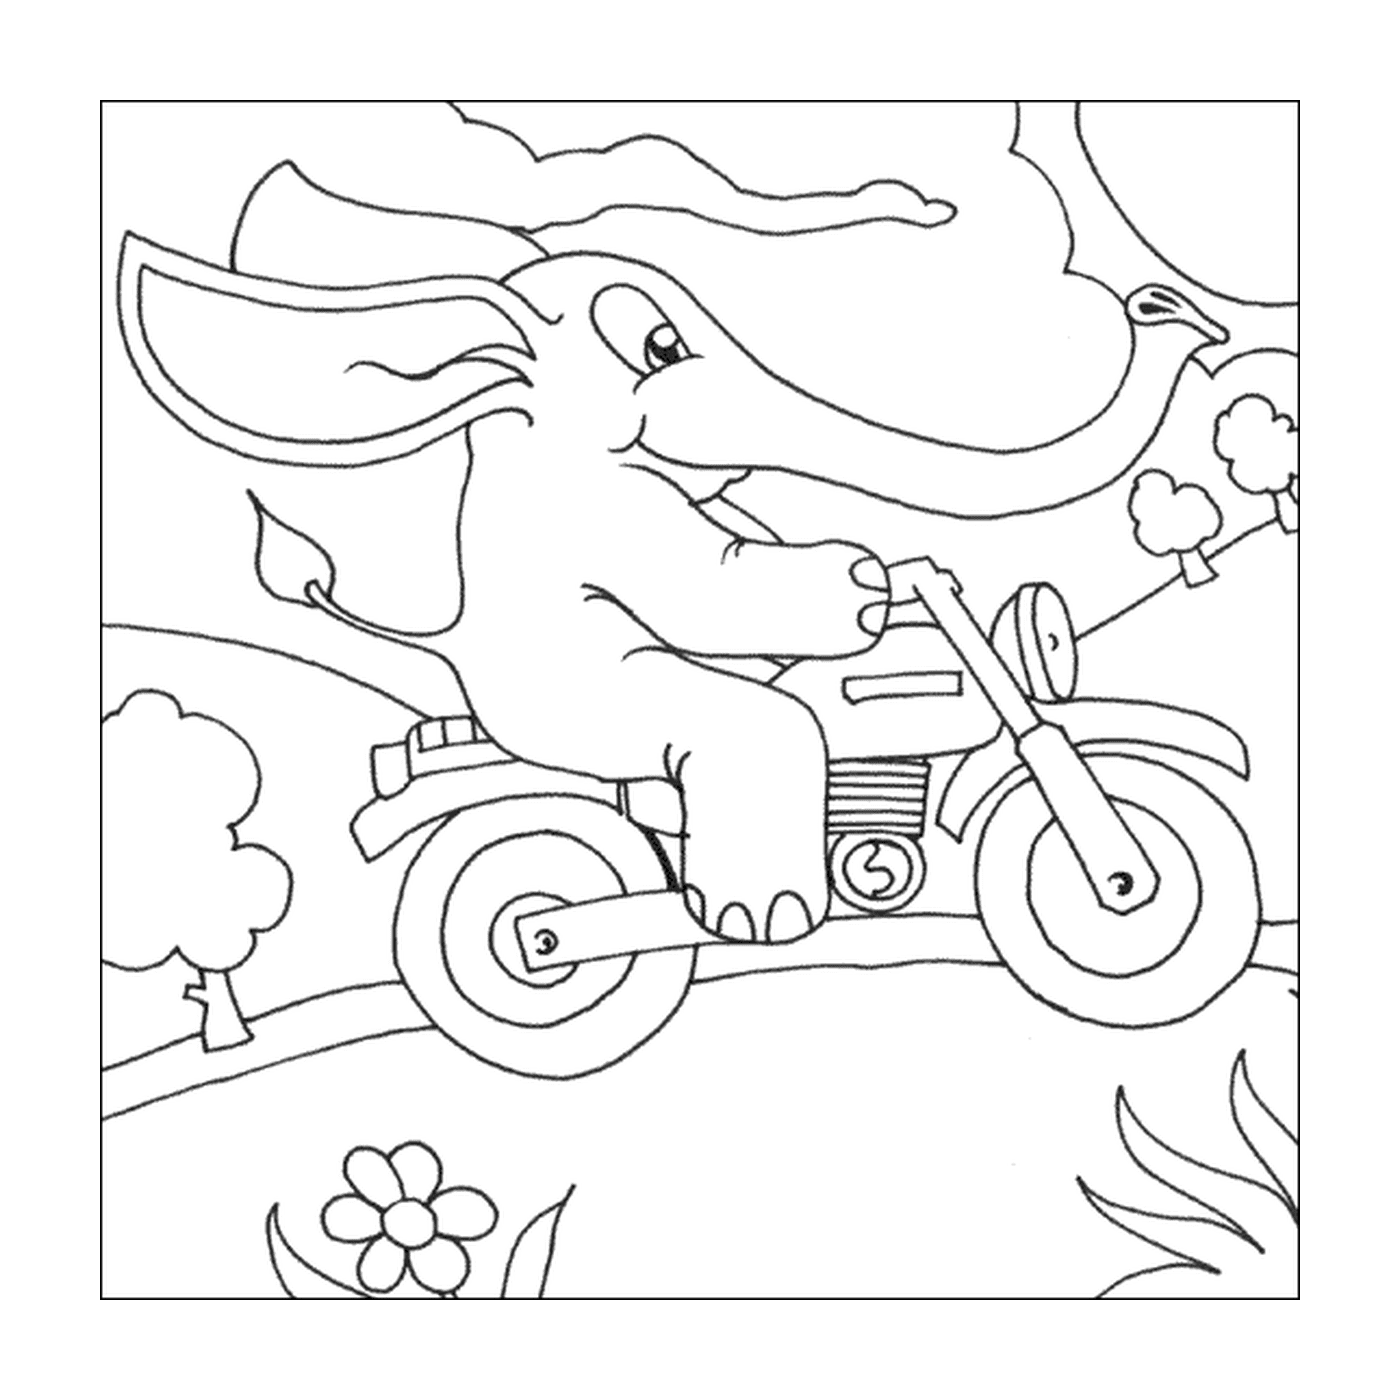  Elephant on a motorcycle in a field 